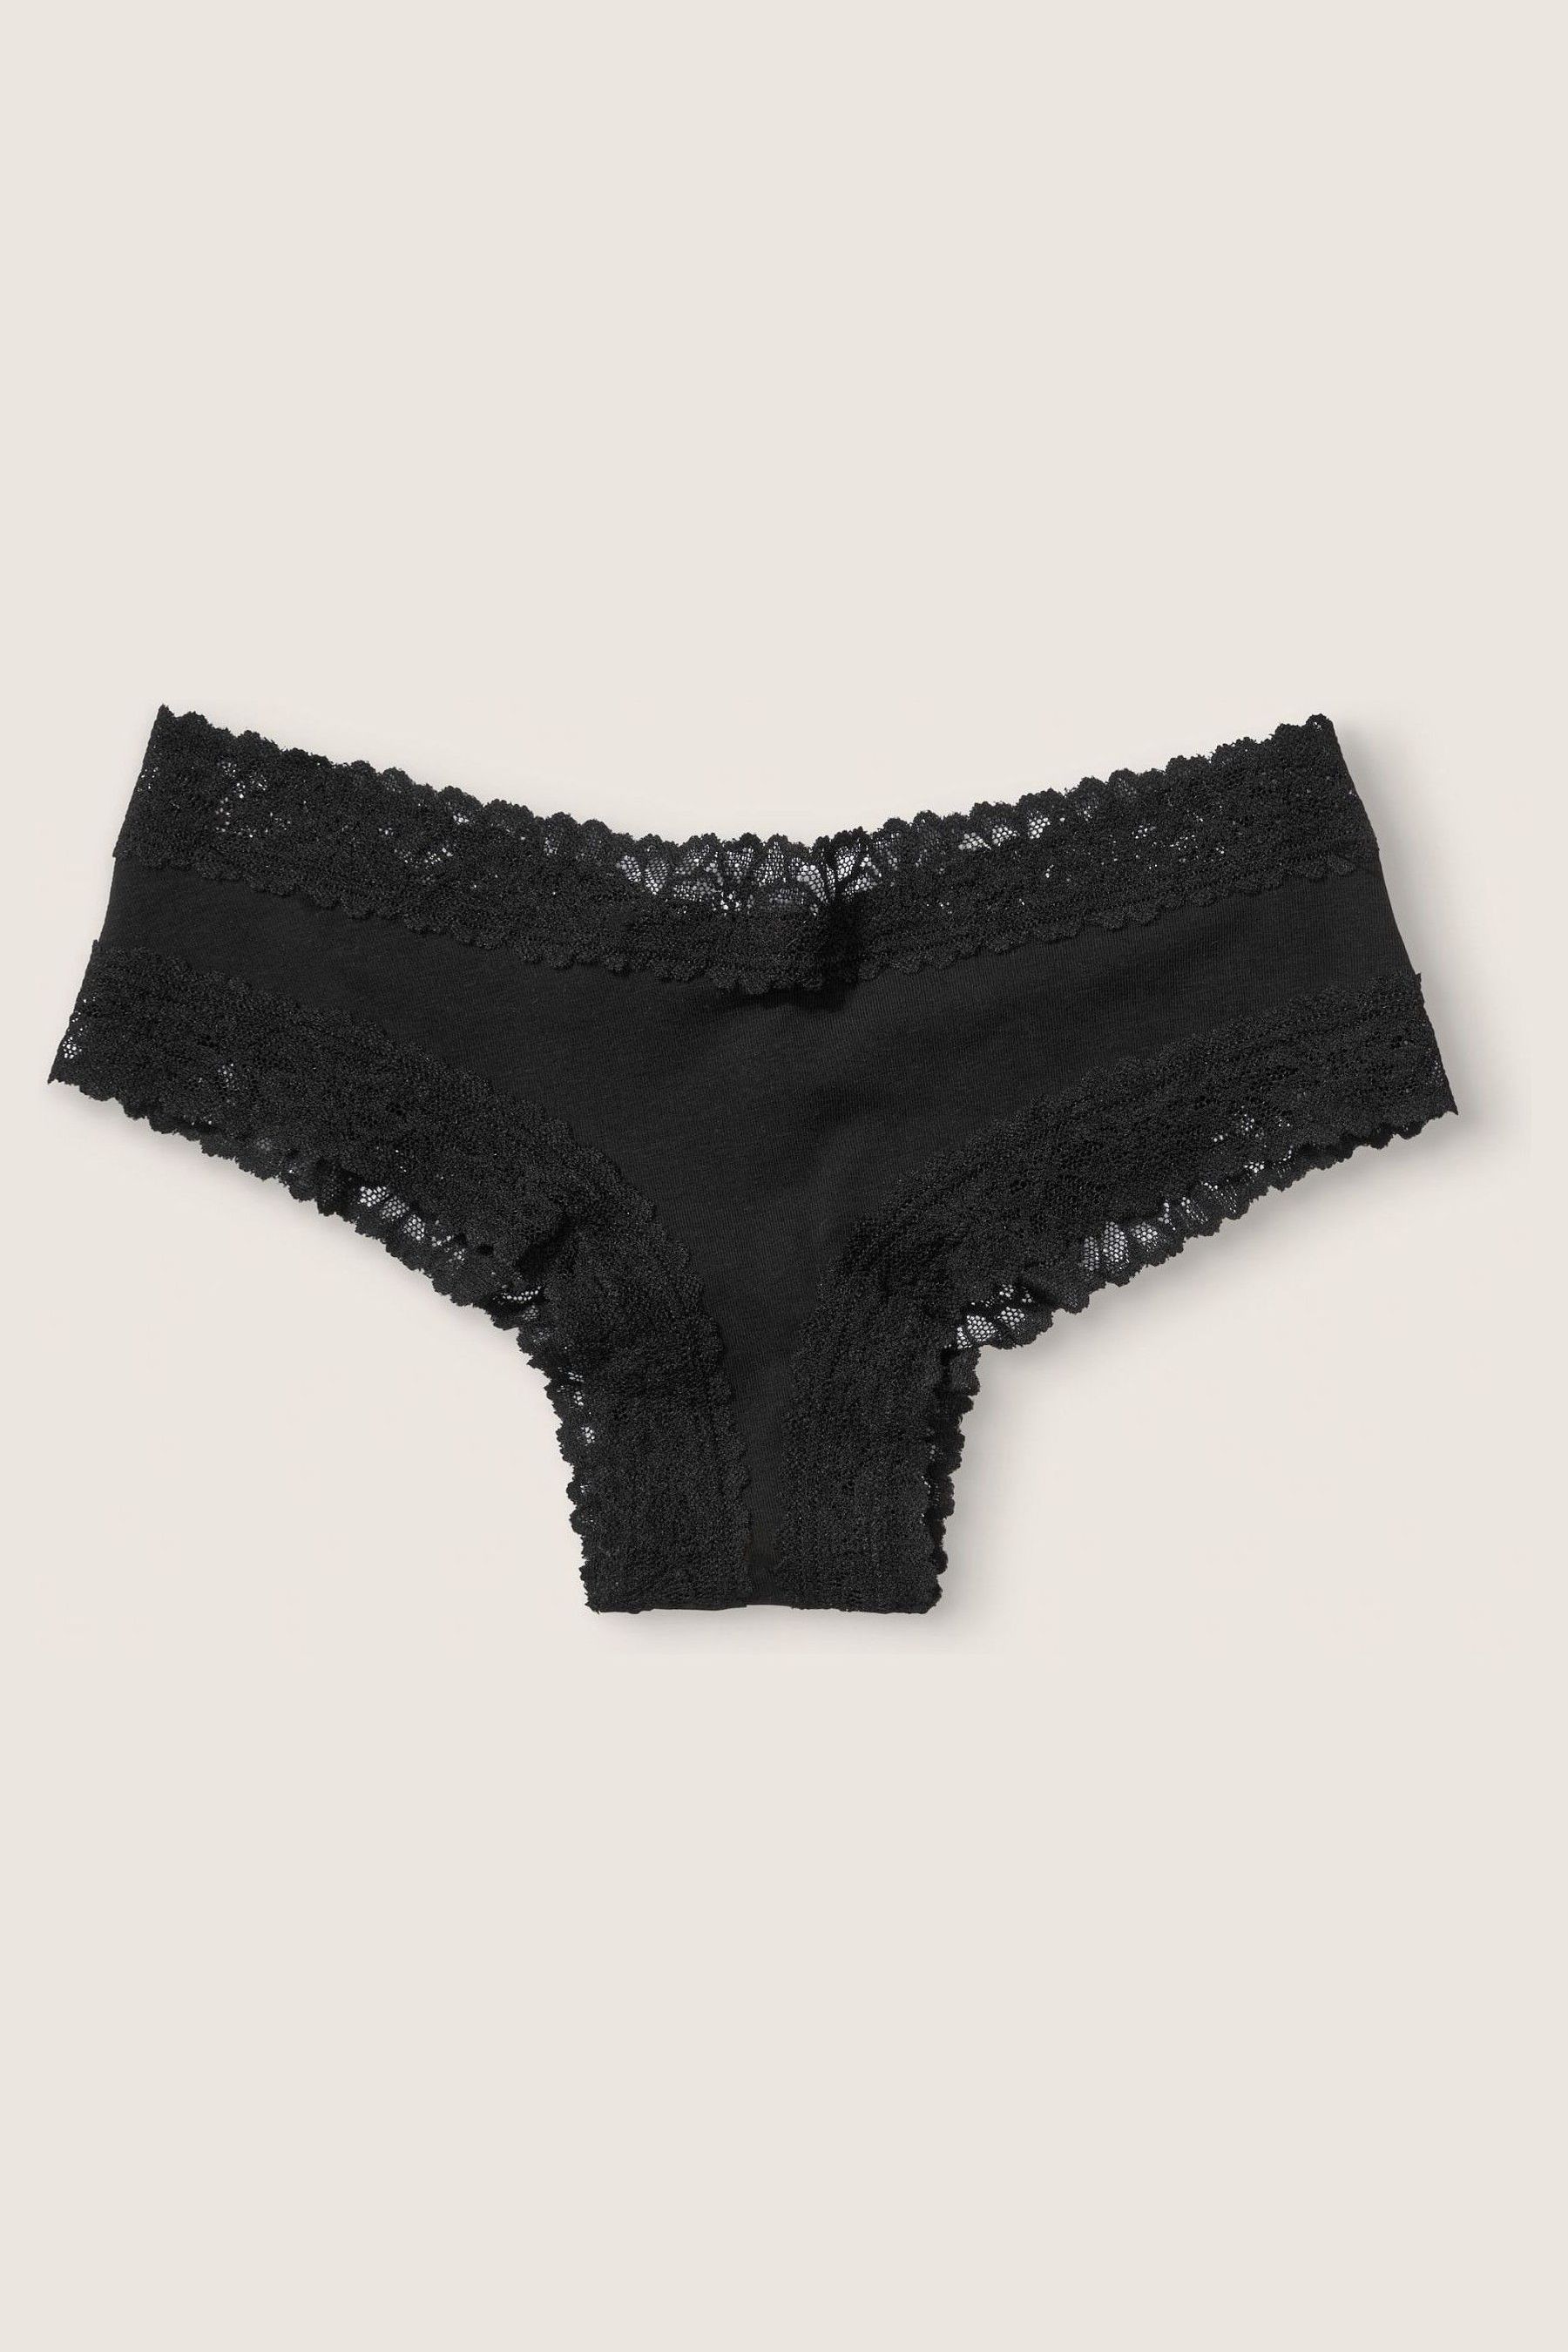 Buy Victoria S Secret Pink Cotton Lace Trim Cheeky Knickers From The Victoria S Secret Uk Online